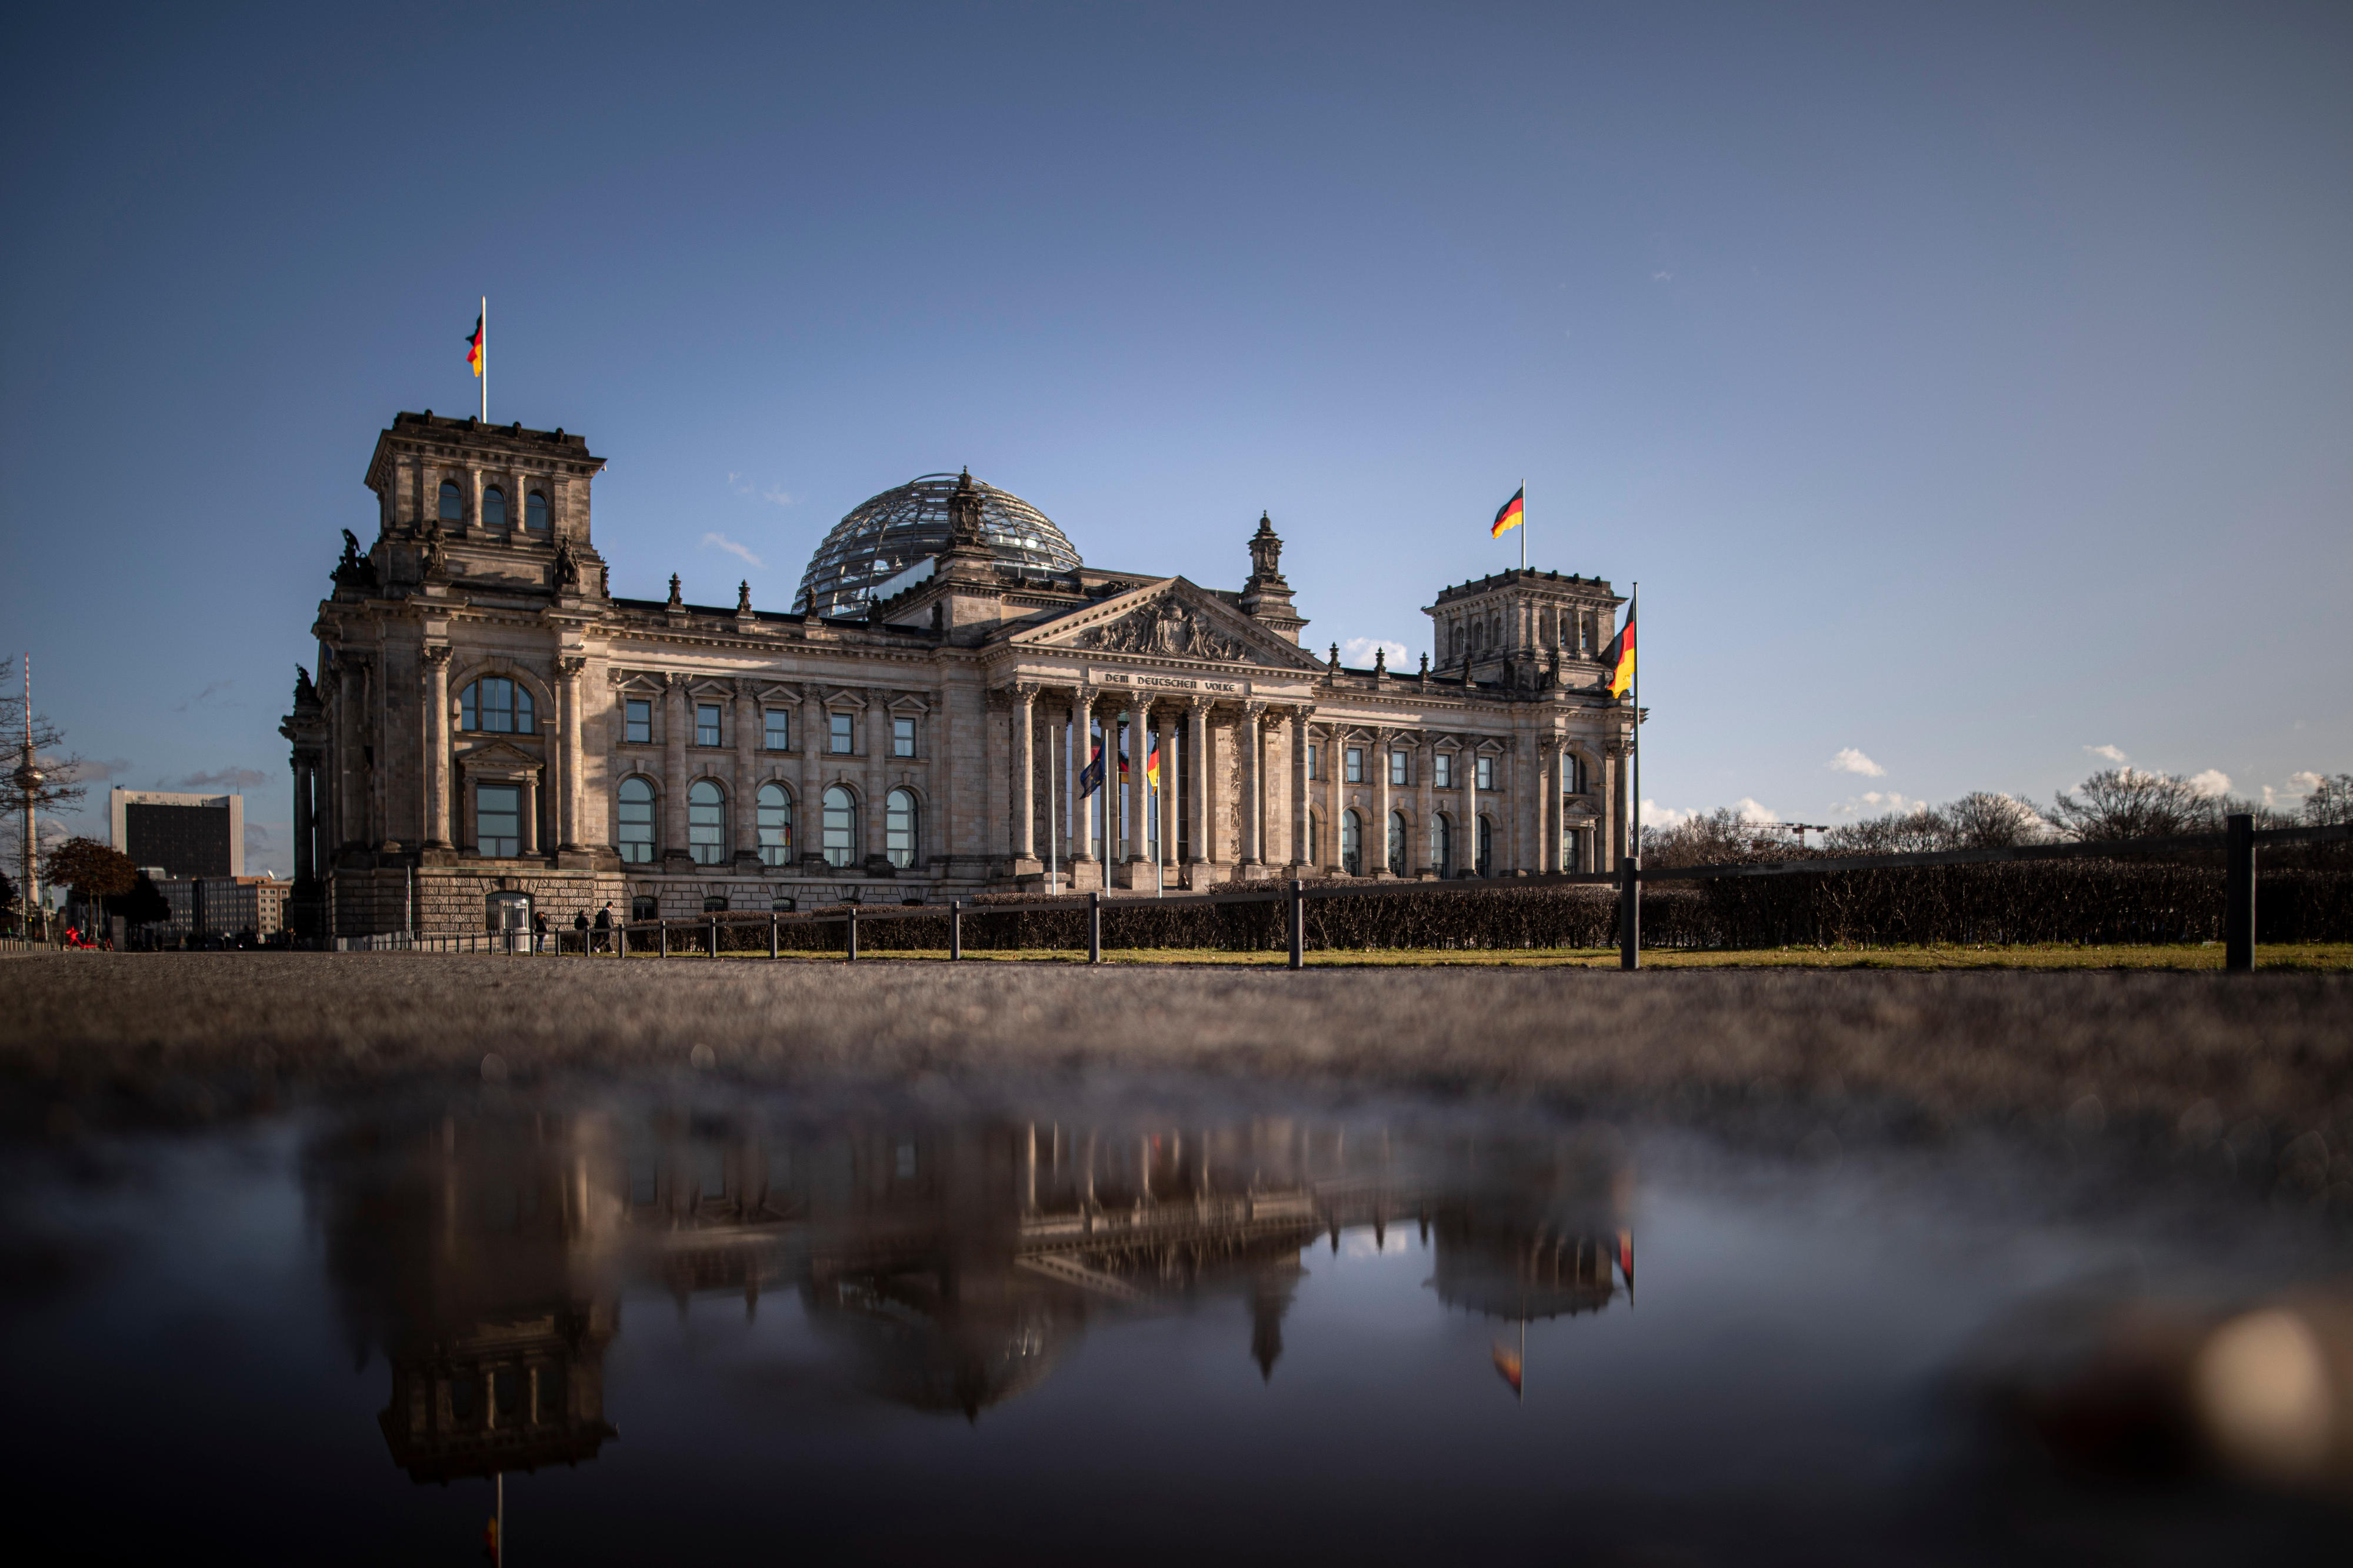 Exterior view of the German Parliament (Reichstag) in Berlin